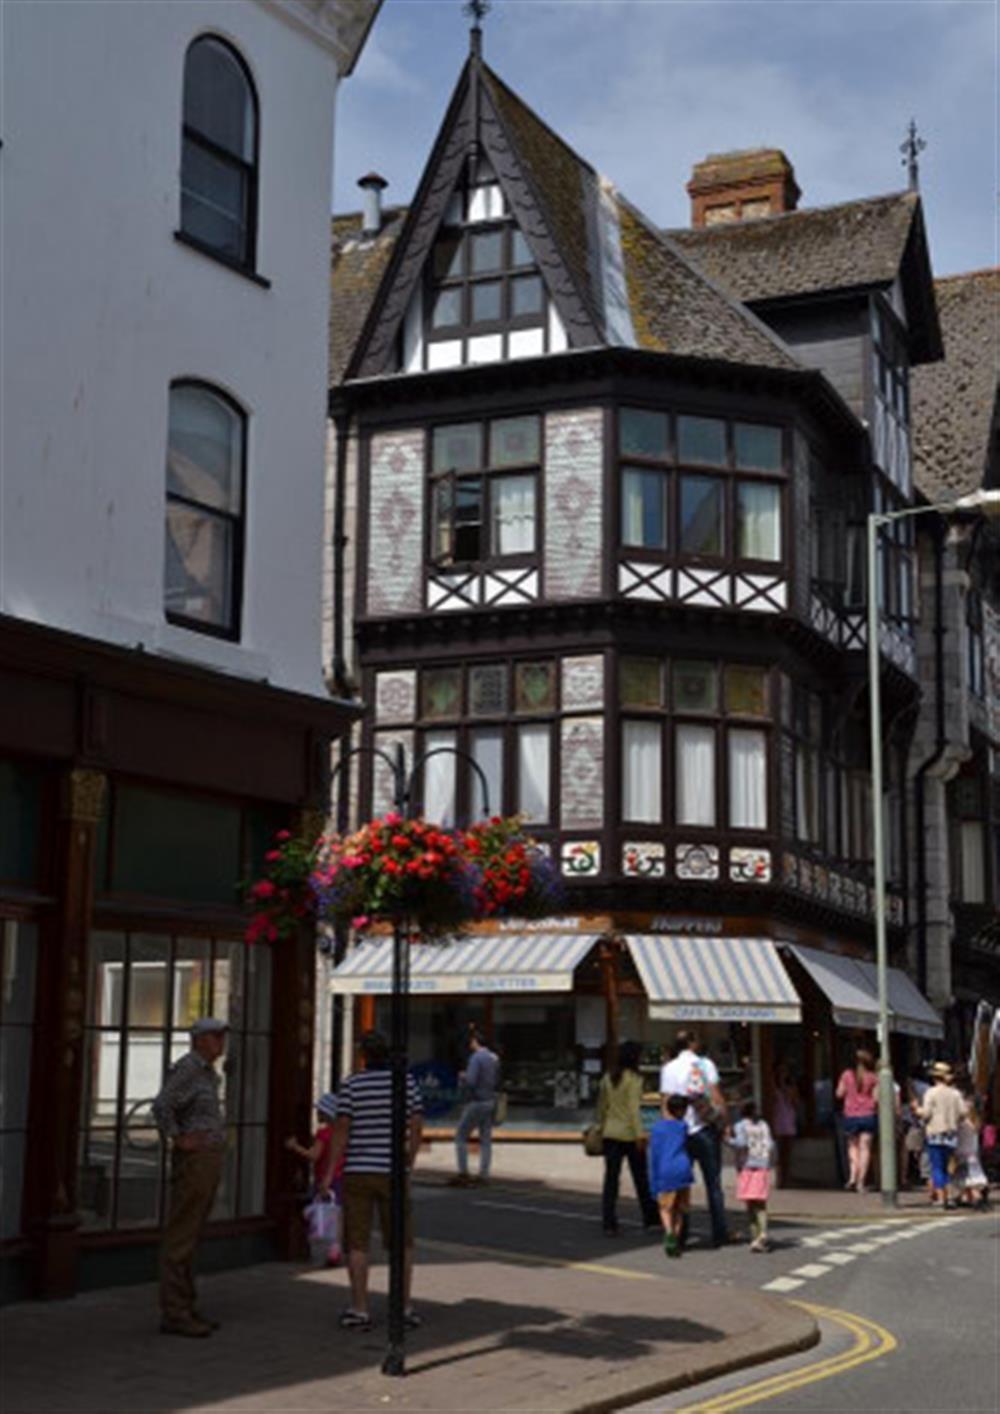 Elizabethan buildings in Dartmouth. at The White House in Torcross